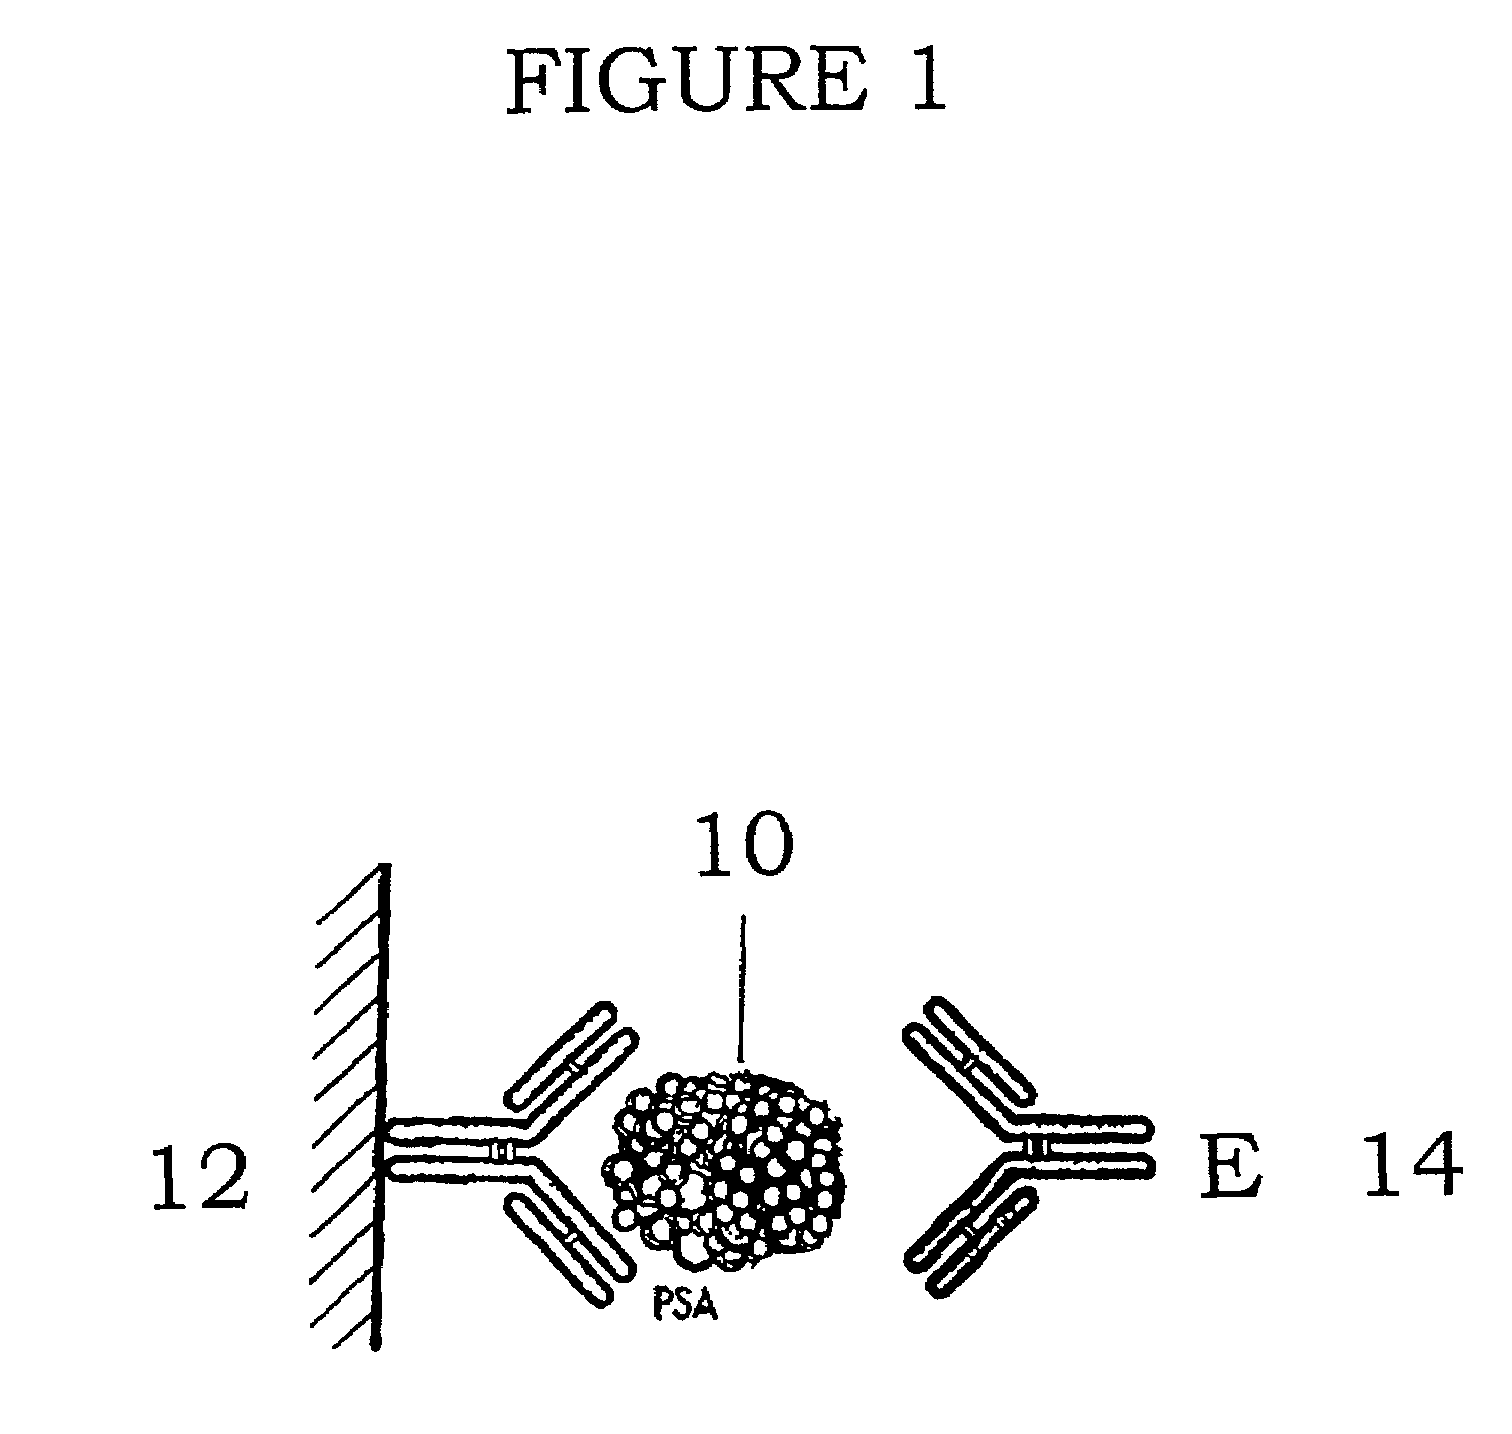 Methods and devices for detecting non-complexed prostate specific antigen